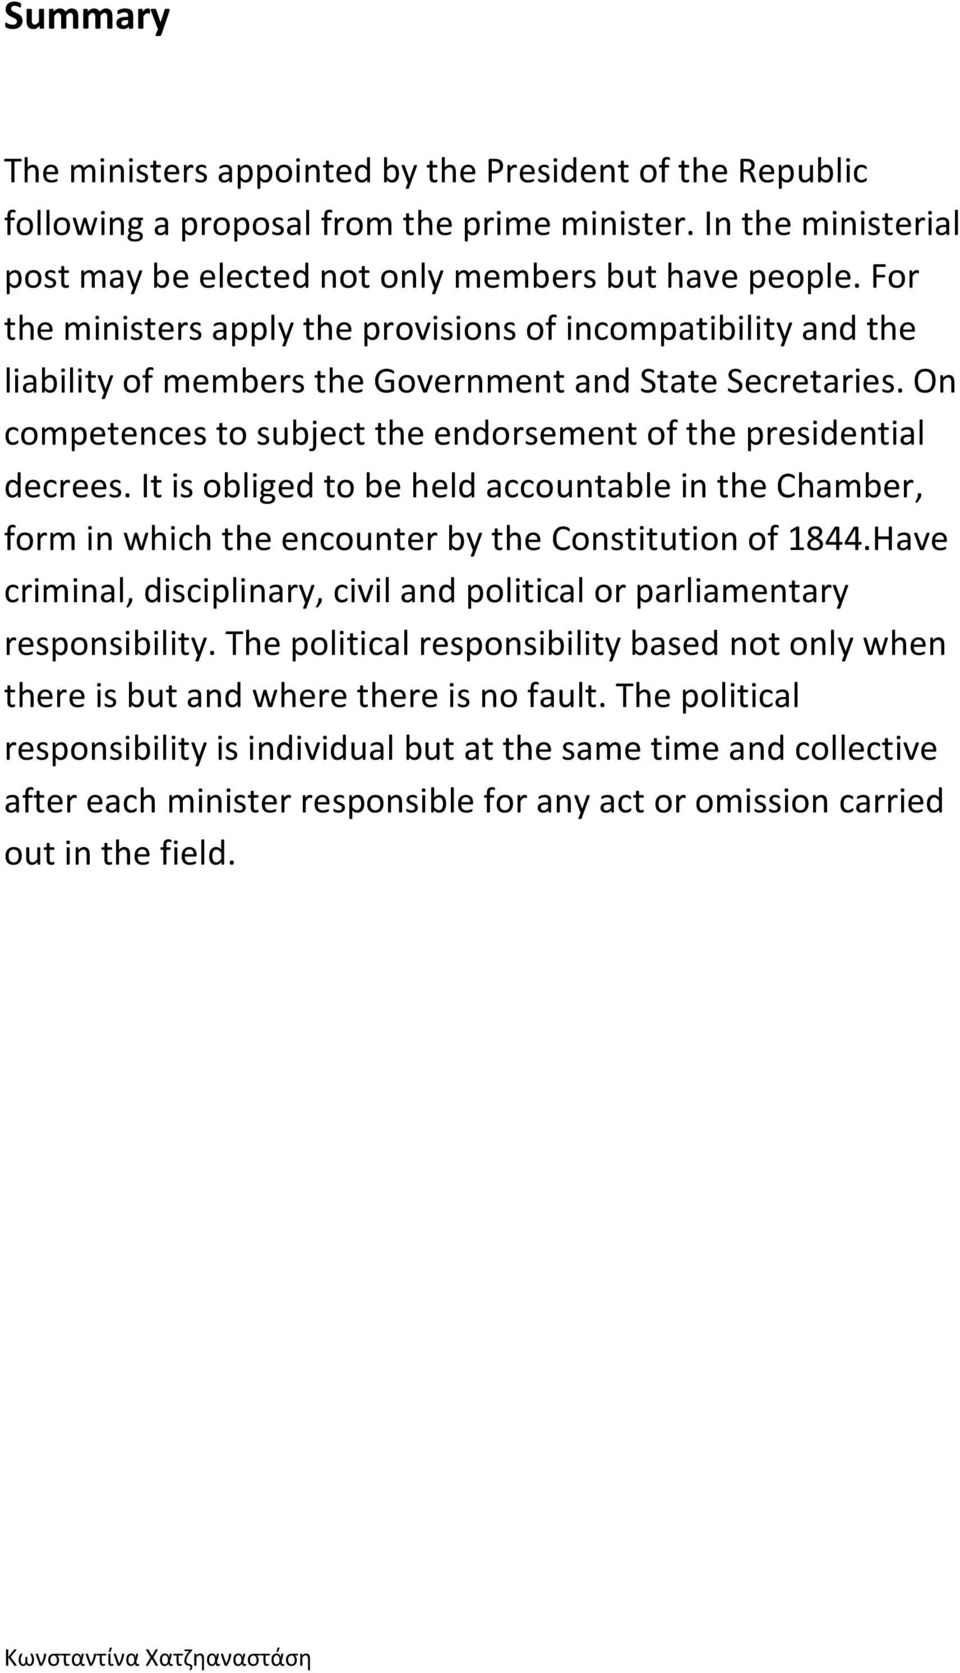 It is obliged to be held accountable in the Chamber, form in which the encounter by the Constitution of 1844.Have criminal, disciplinary, civil and political or parliamentary responsibility.